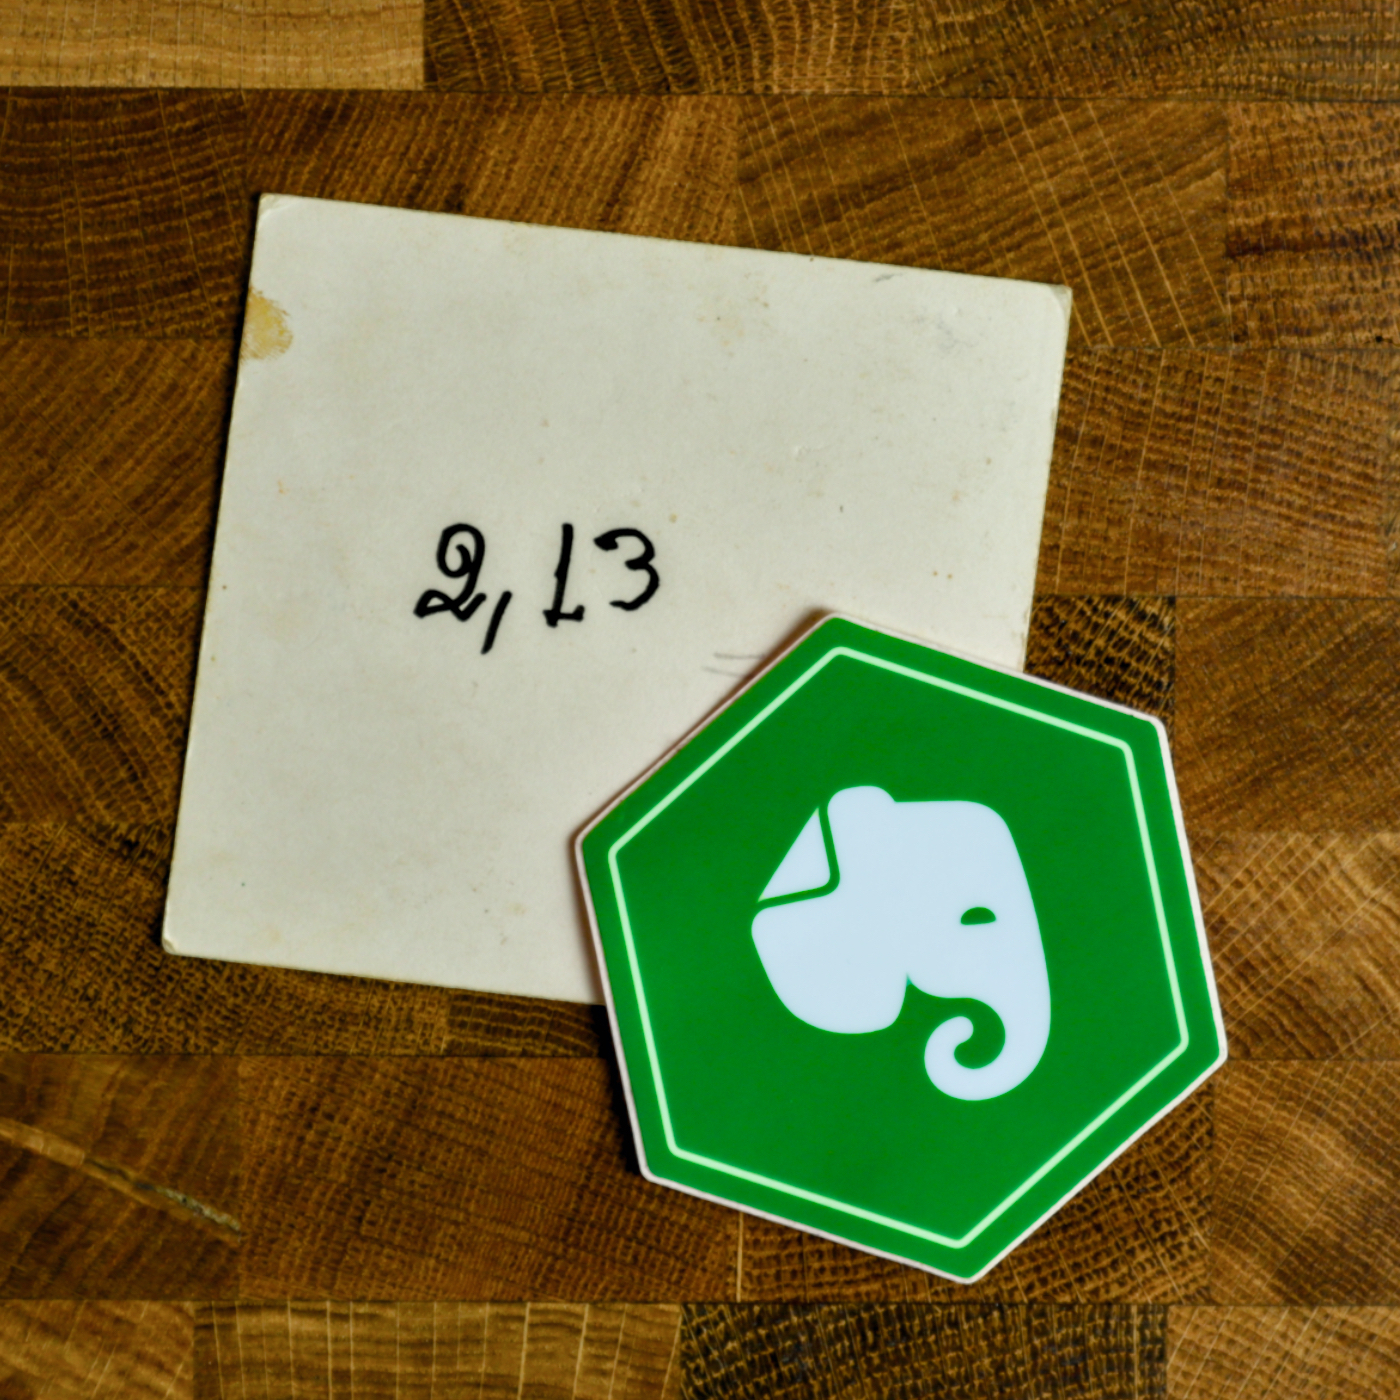 Auto-generated description: A square piece of paper with the handwritten text 21,3 lies beside a green hexagonal sticker featuring a white elephant logo.